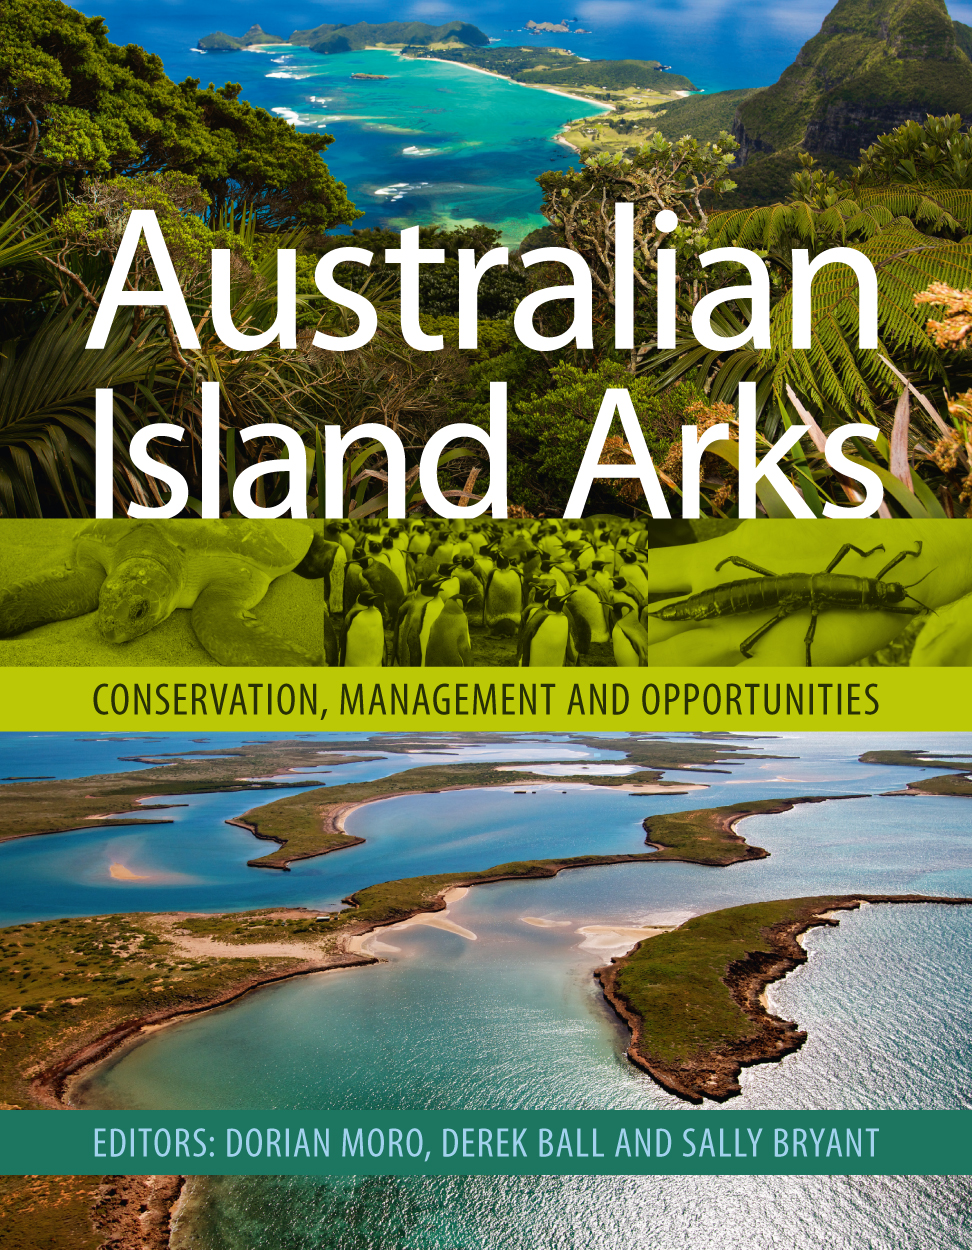 Cover of Australian Island Arks featuring photos of islands and the wildlife found on them.